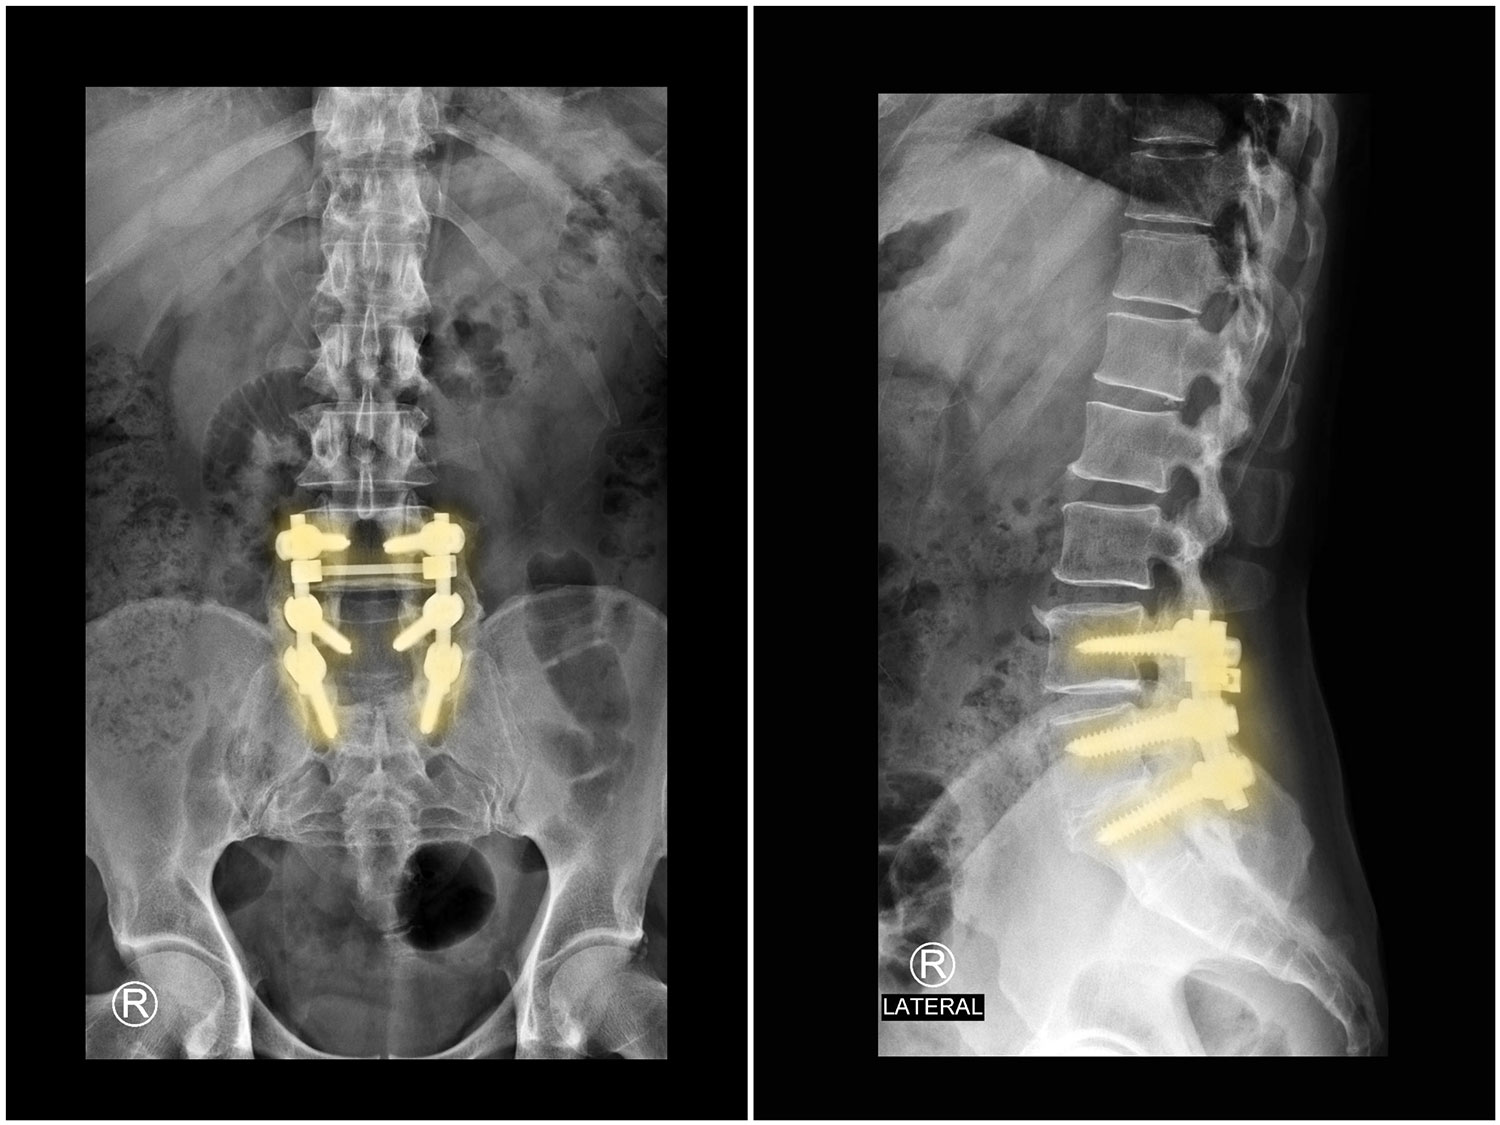 Lumbar Spinal Fusion: Surgical Treatment for Chronic Low Back Pain